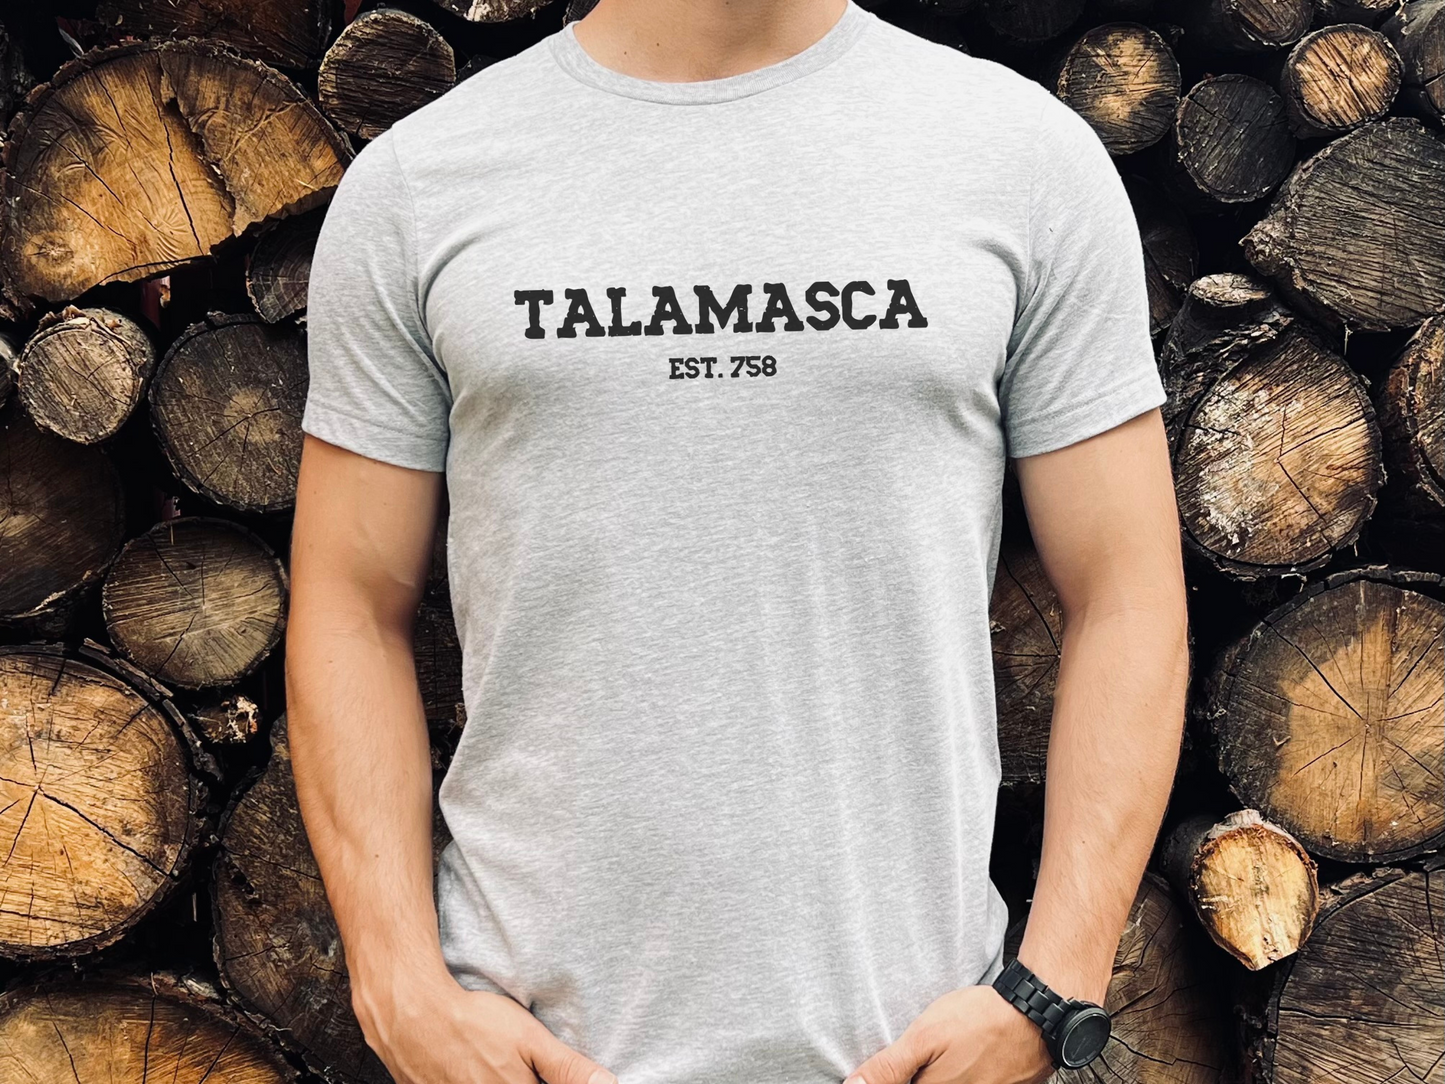 Talamasca Shirt, Interview with the Vampire, The Witching Hour, Mayfair Witches, Talamasca T-shirt, Bookish Gifts, Bookish Shirt